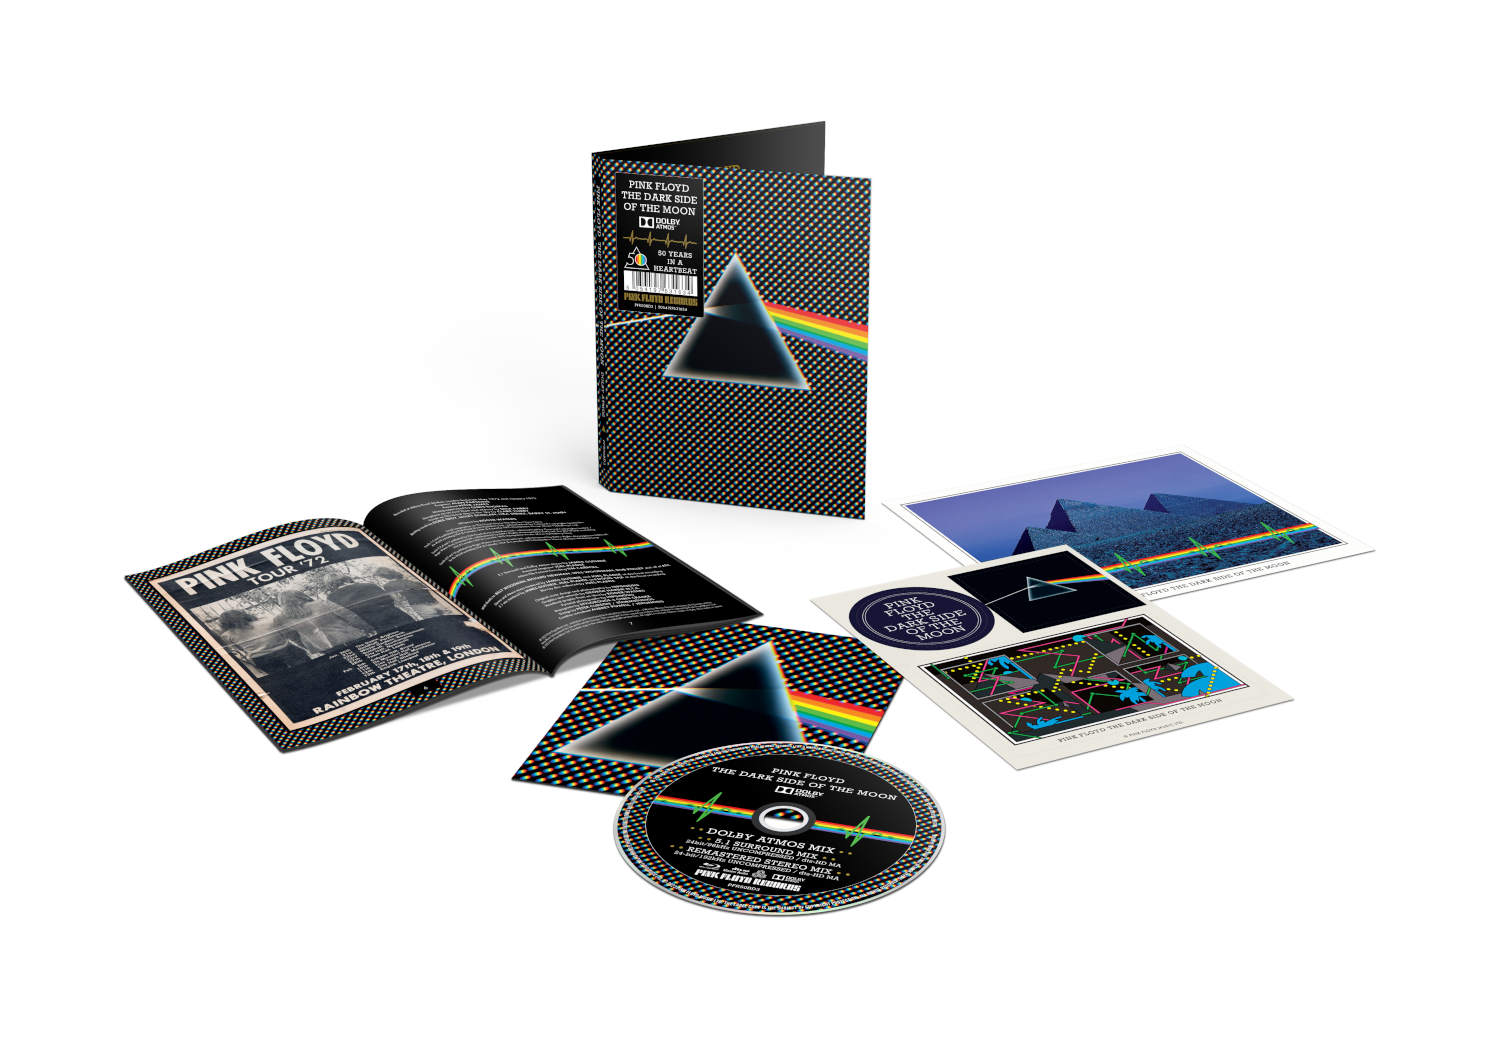 Pink Floyd announce standalone blu-ray of The Dark Side of the Moon –  SuperDeluxeEdition